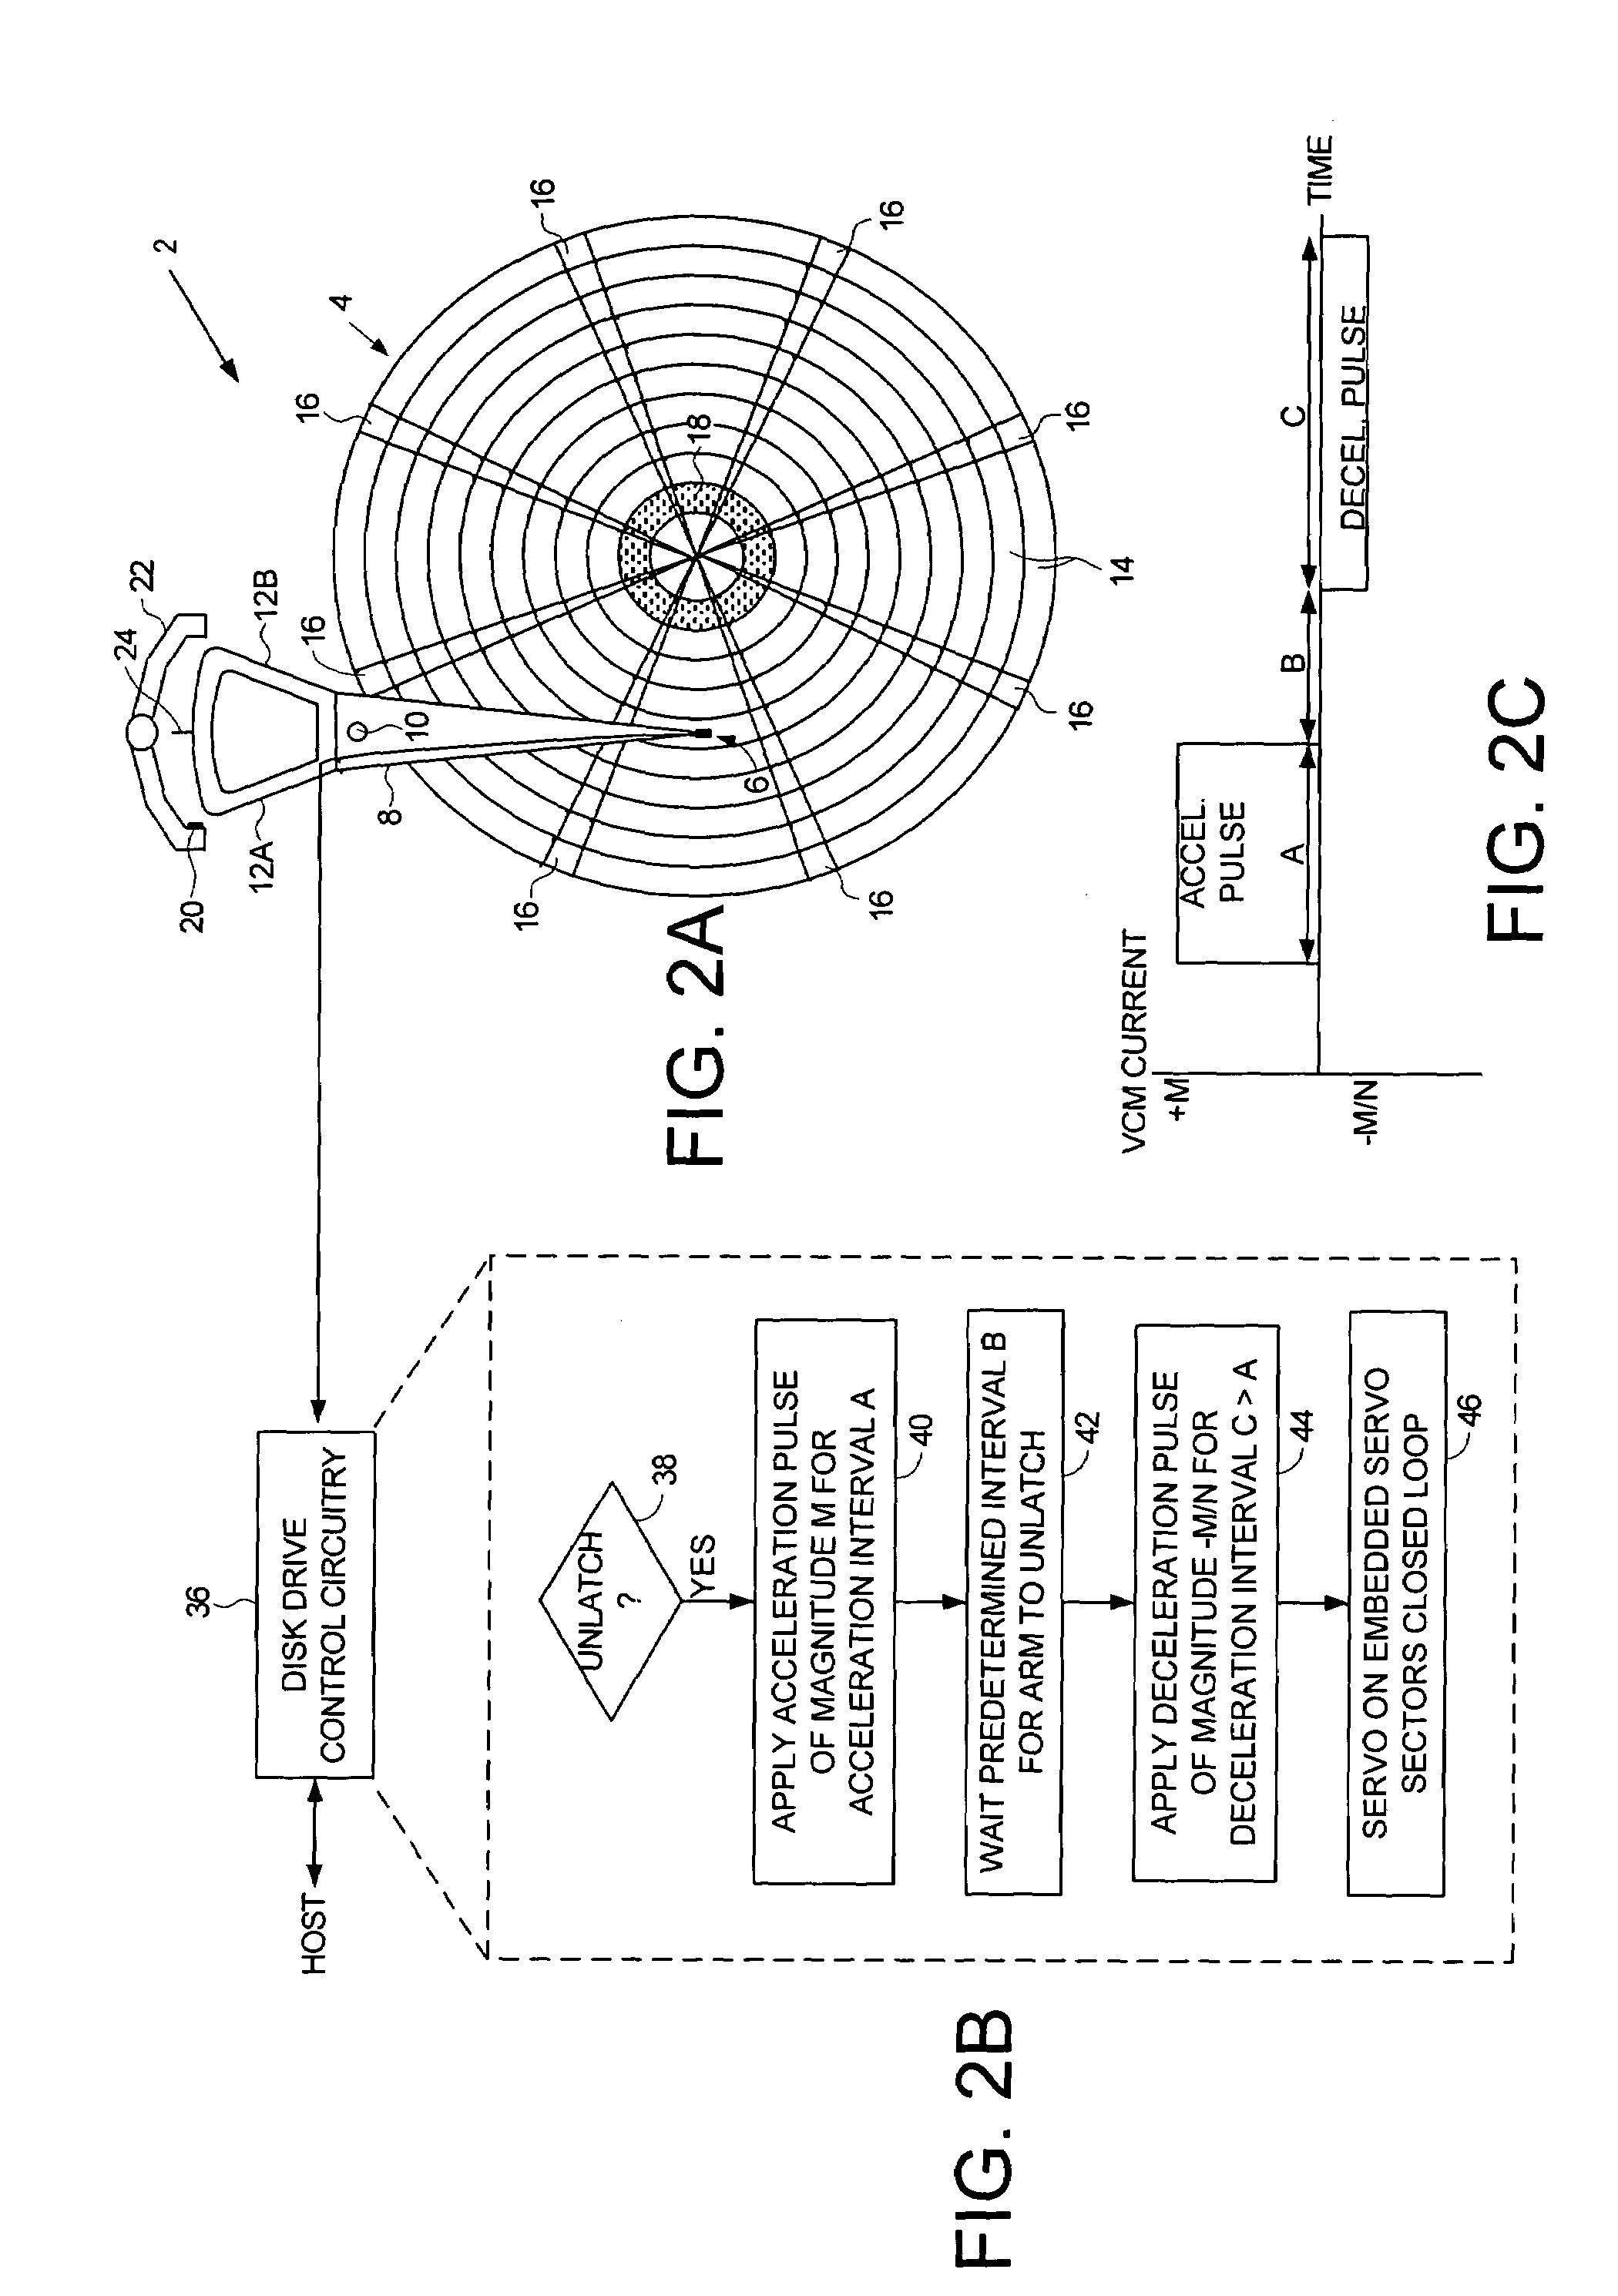 Disk drive employing asymmetric acceleration/deceleration pulses for acoustic noise reduction during unlatch